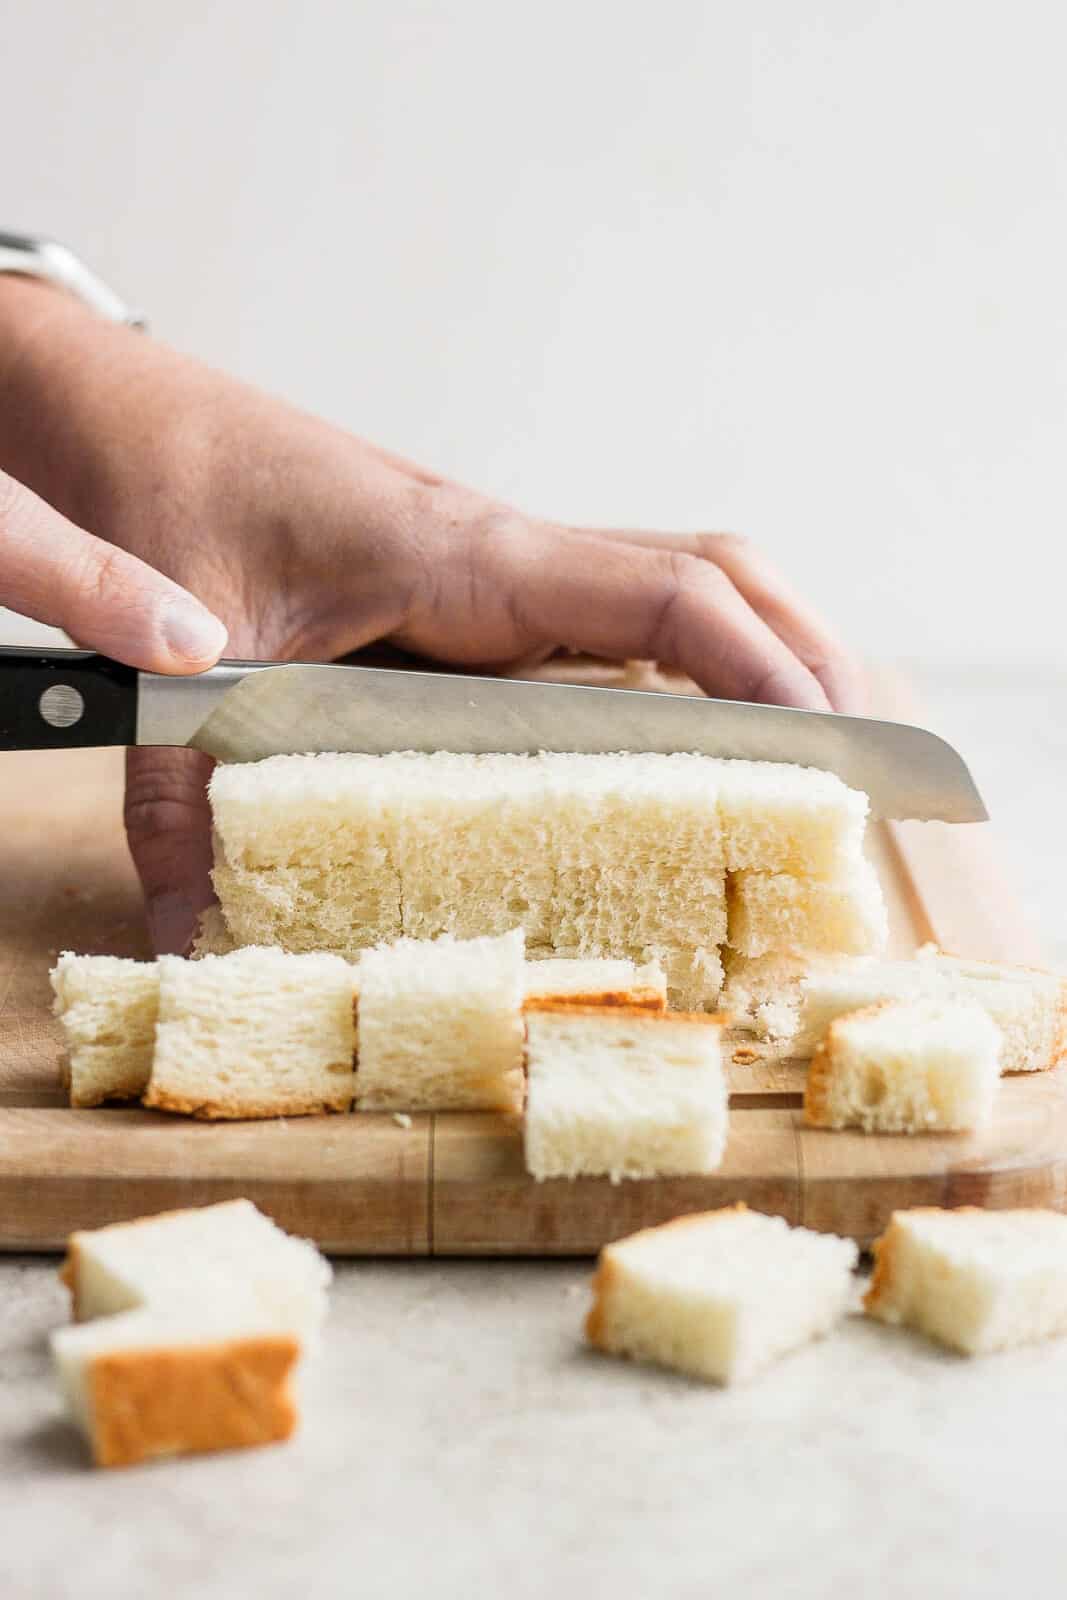 Bread being cubed using a serrated knife on a cutting board.